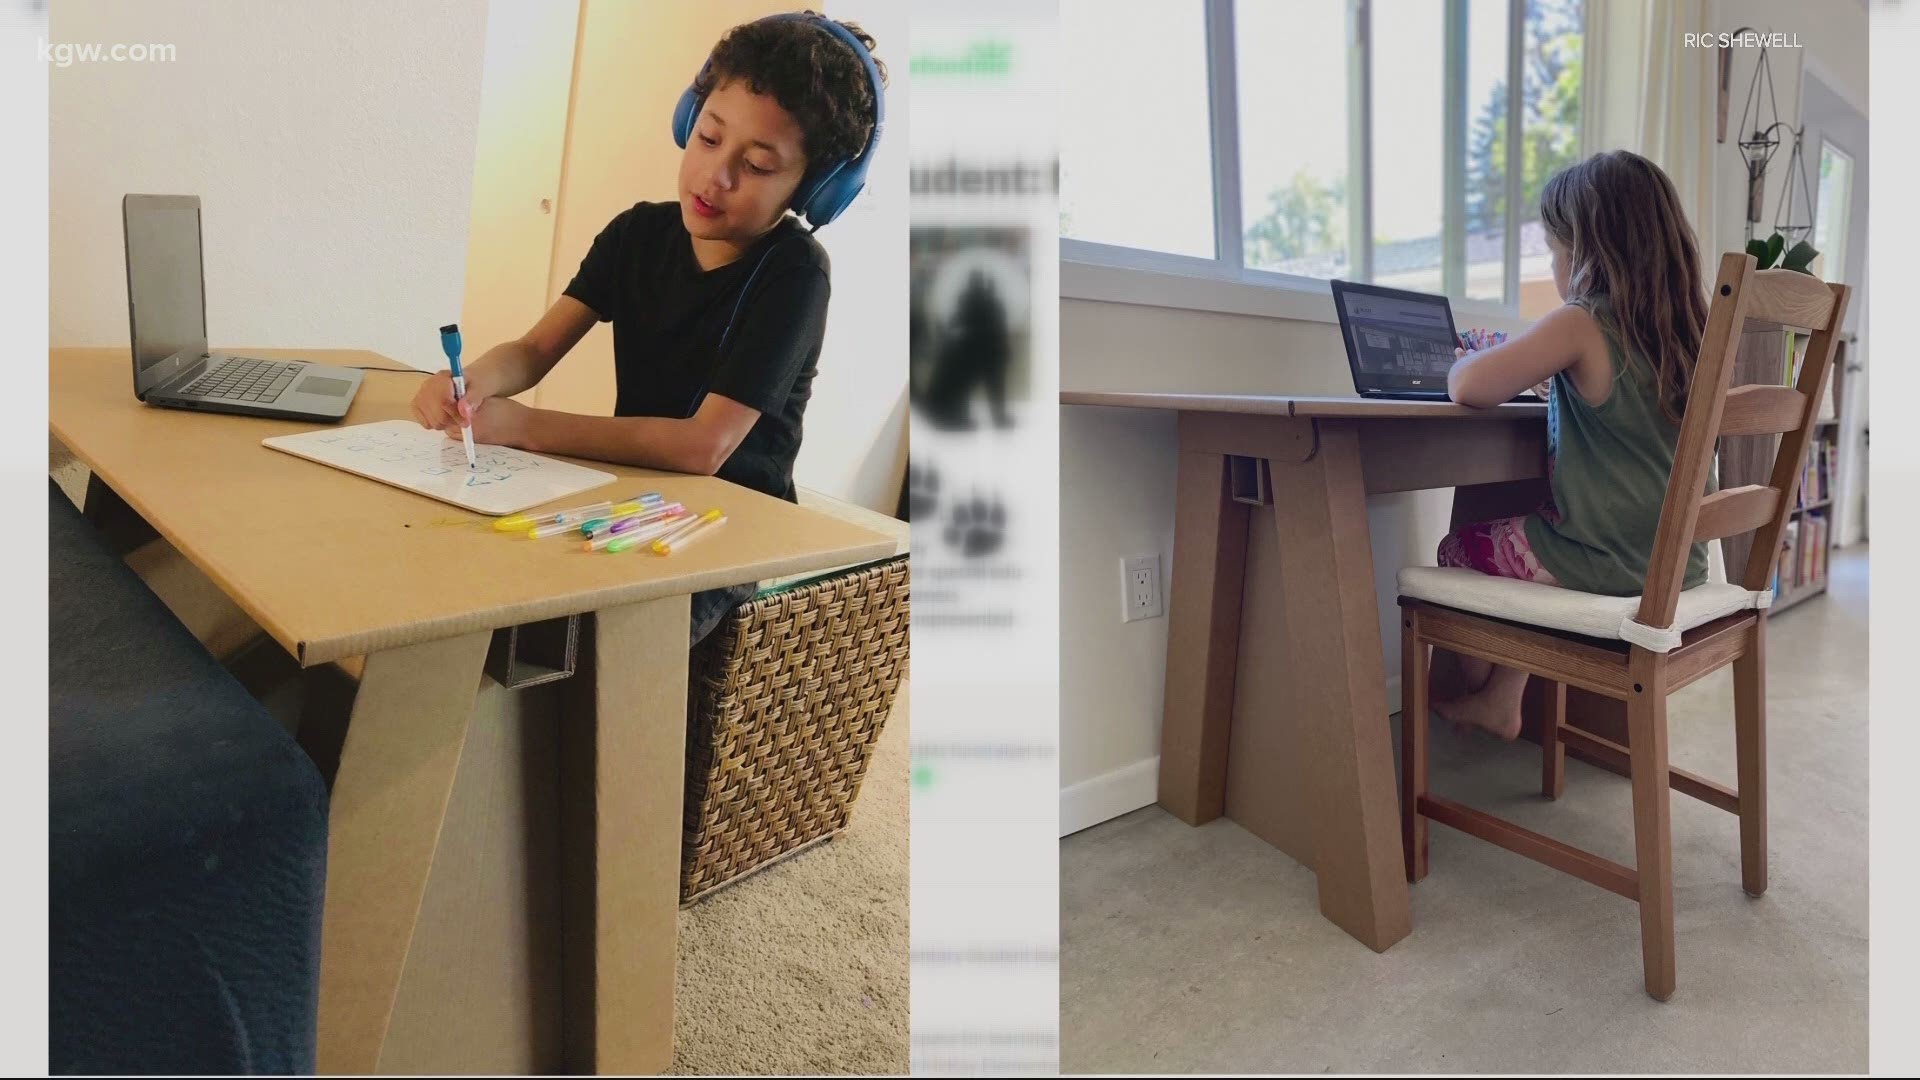 The Parent-Teacher Club of McKay Elementary School created durable cardboard desks to be given to each student for the school year.